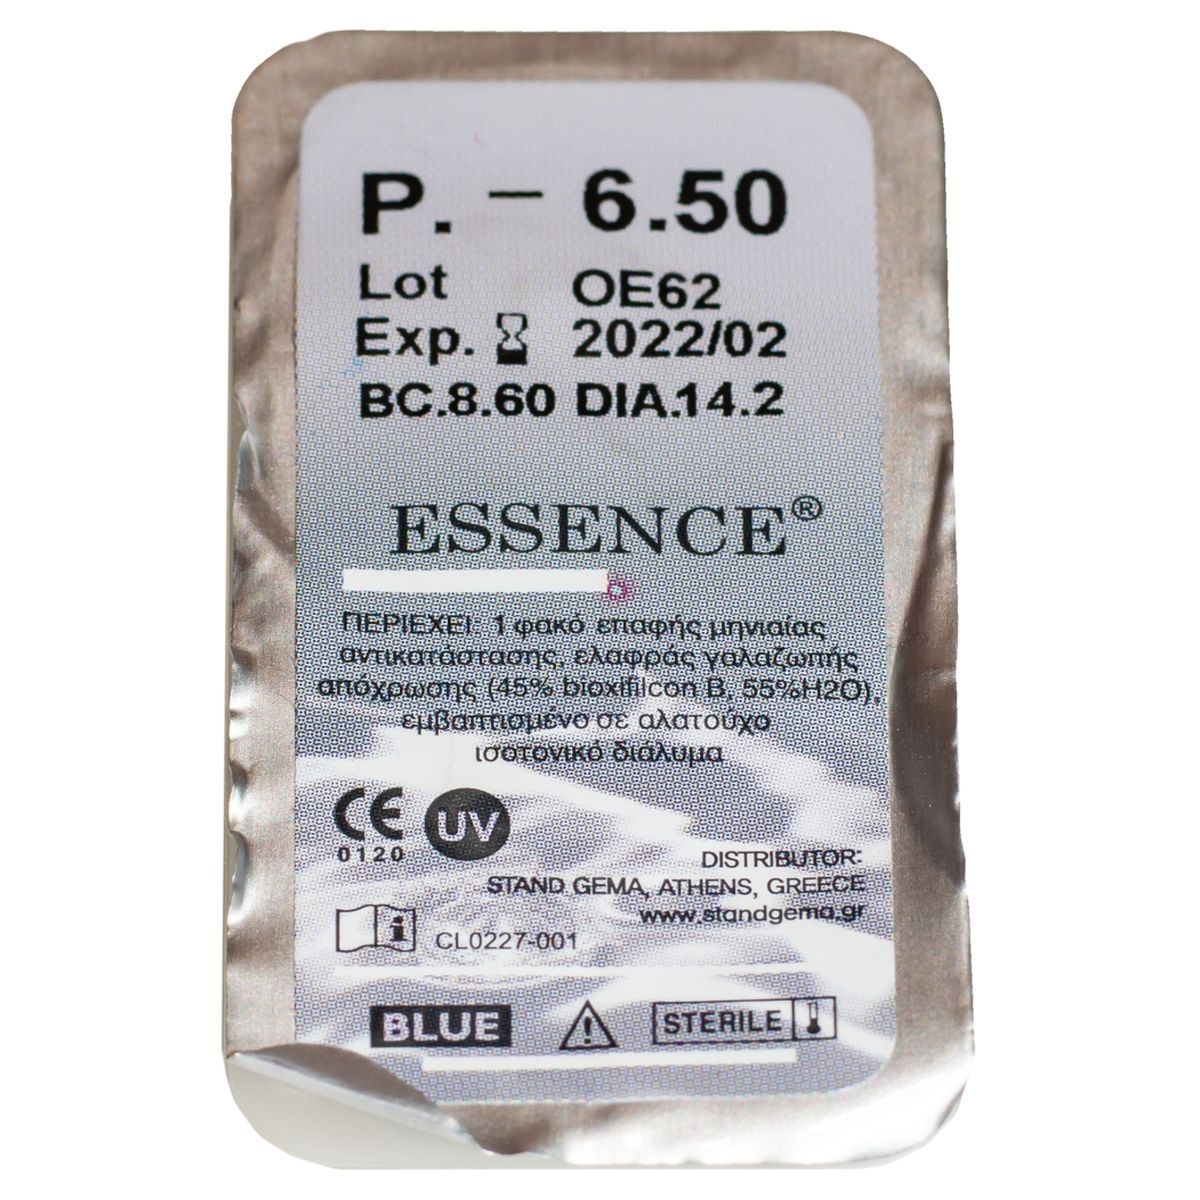 ESSENCE MONTHLY DISPOSABLE CONTACT LENSES WITH HYALURONIC SODIUM (6 LENSES)